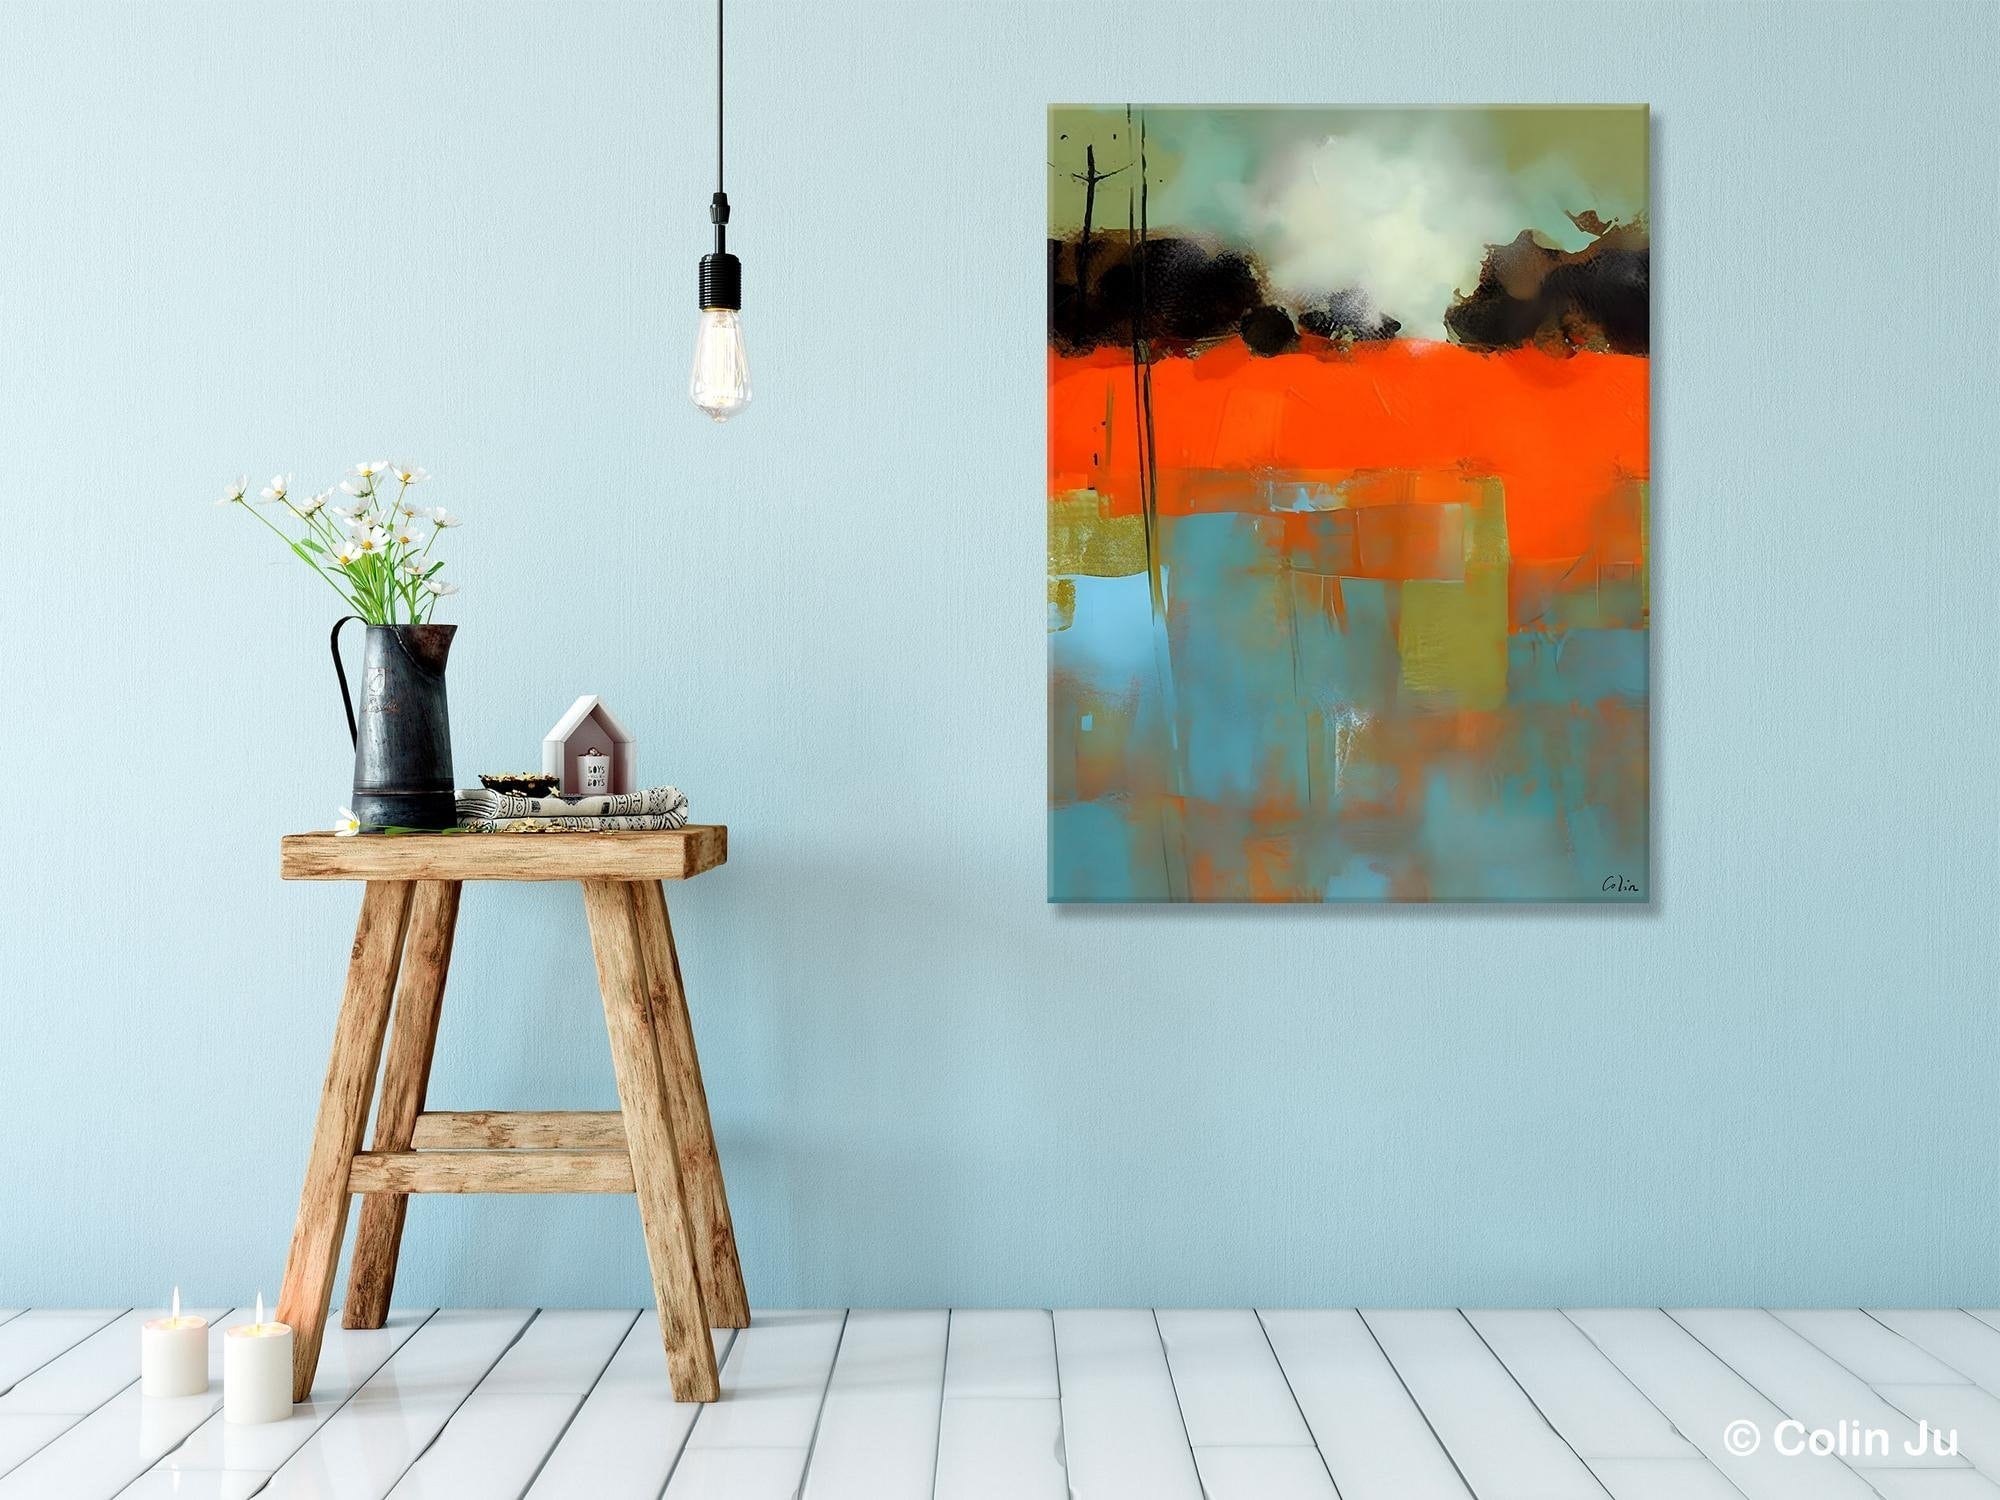 Landscape Canvas Art, Simple Modern Wall Art, Contemporary Acrylic Paintings, Original Abstract Paintings, Large Canvas Painting for Bedroom-LargePaintingArt.com